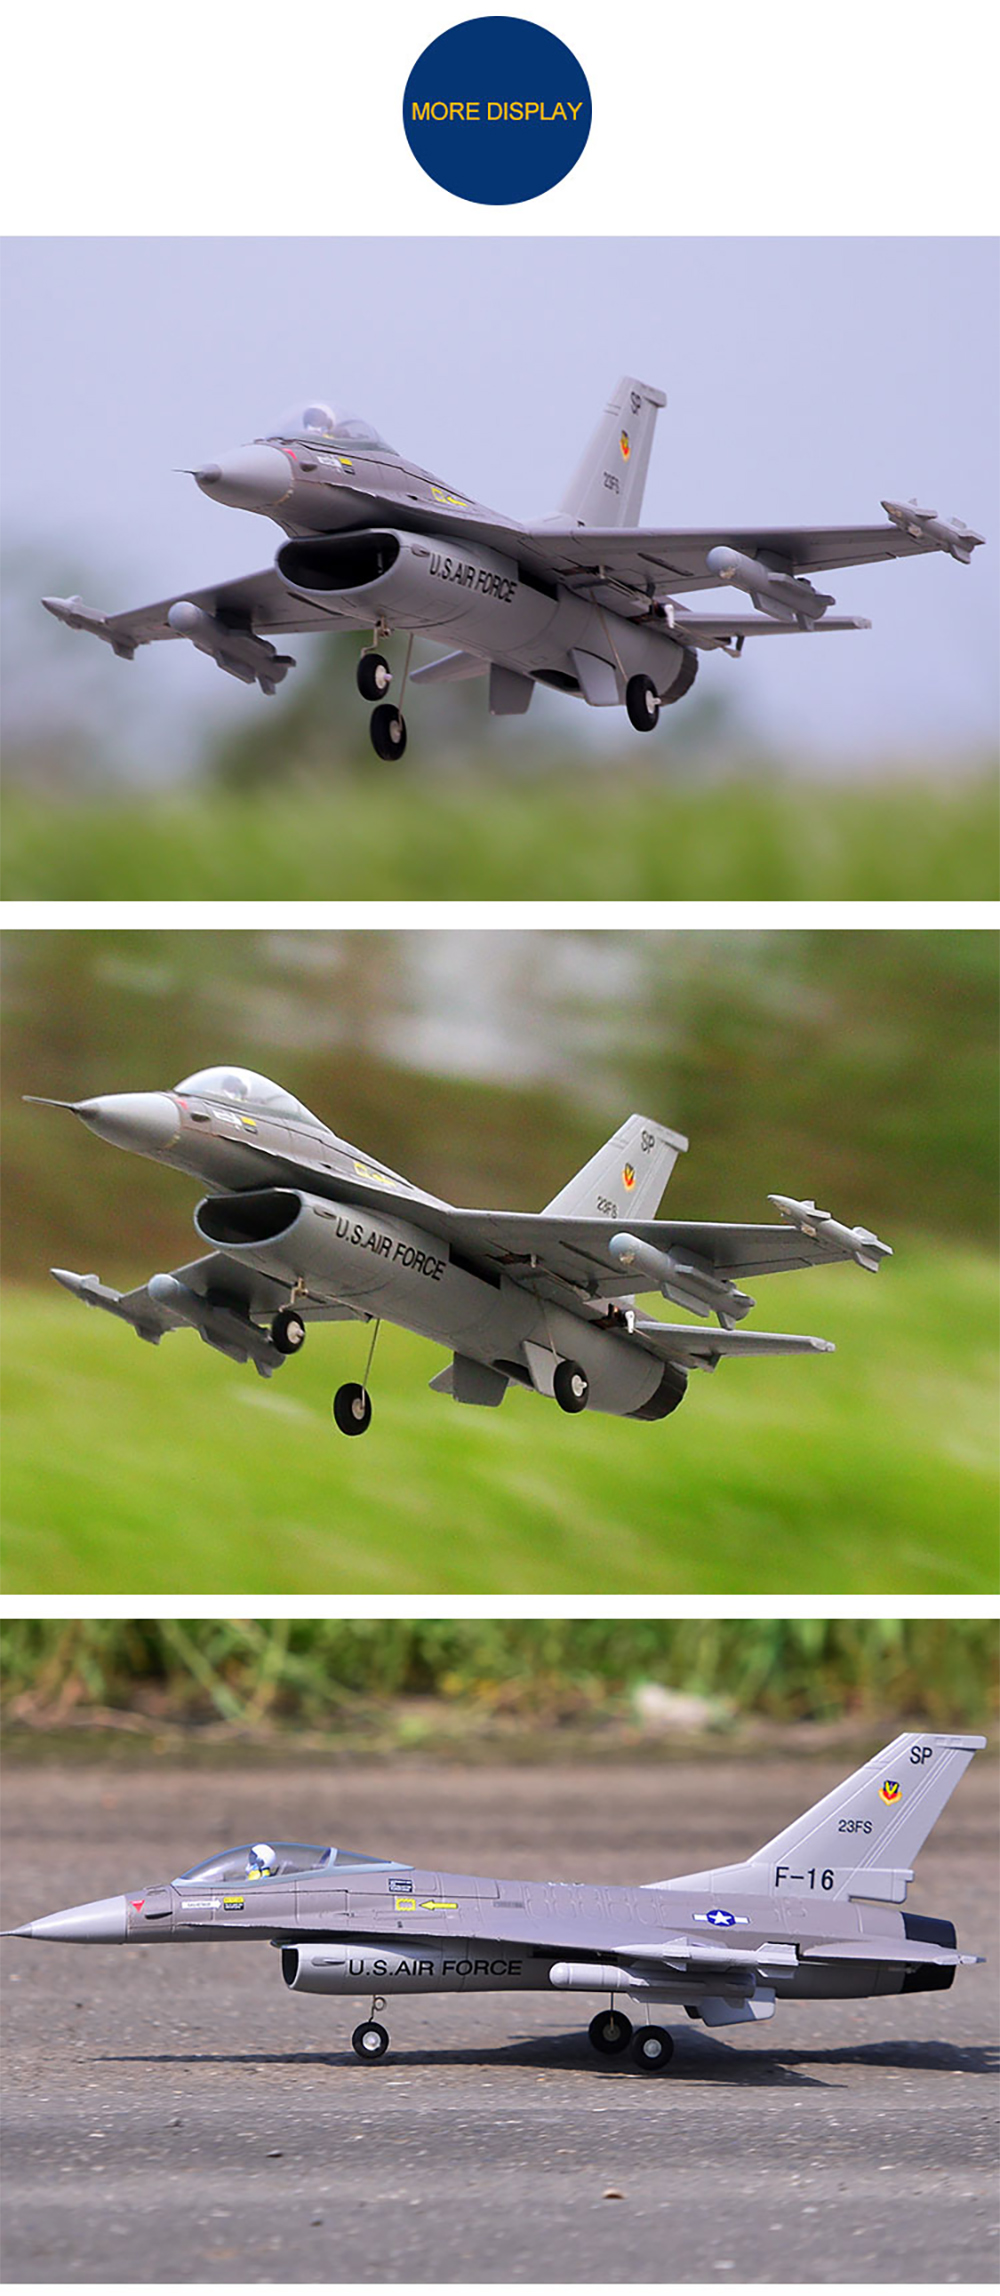 FMS-F-16-Fighting-Falcon-V2-760mm-Wingspan-64mm-11-Blade-Ducted-Fan-Aircrafts-EPO-RC-Airplane-PNP-1773419-6